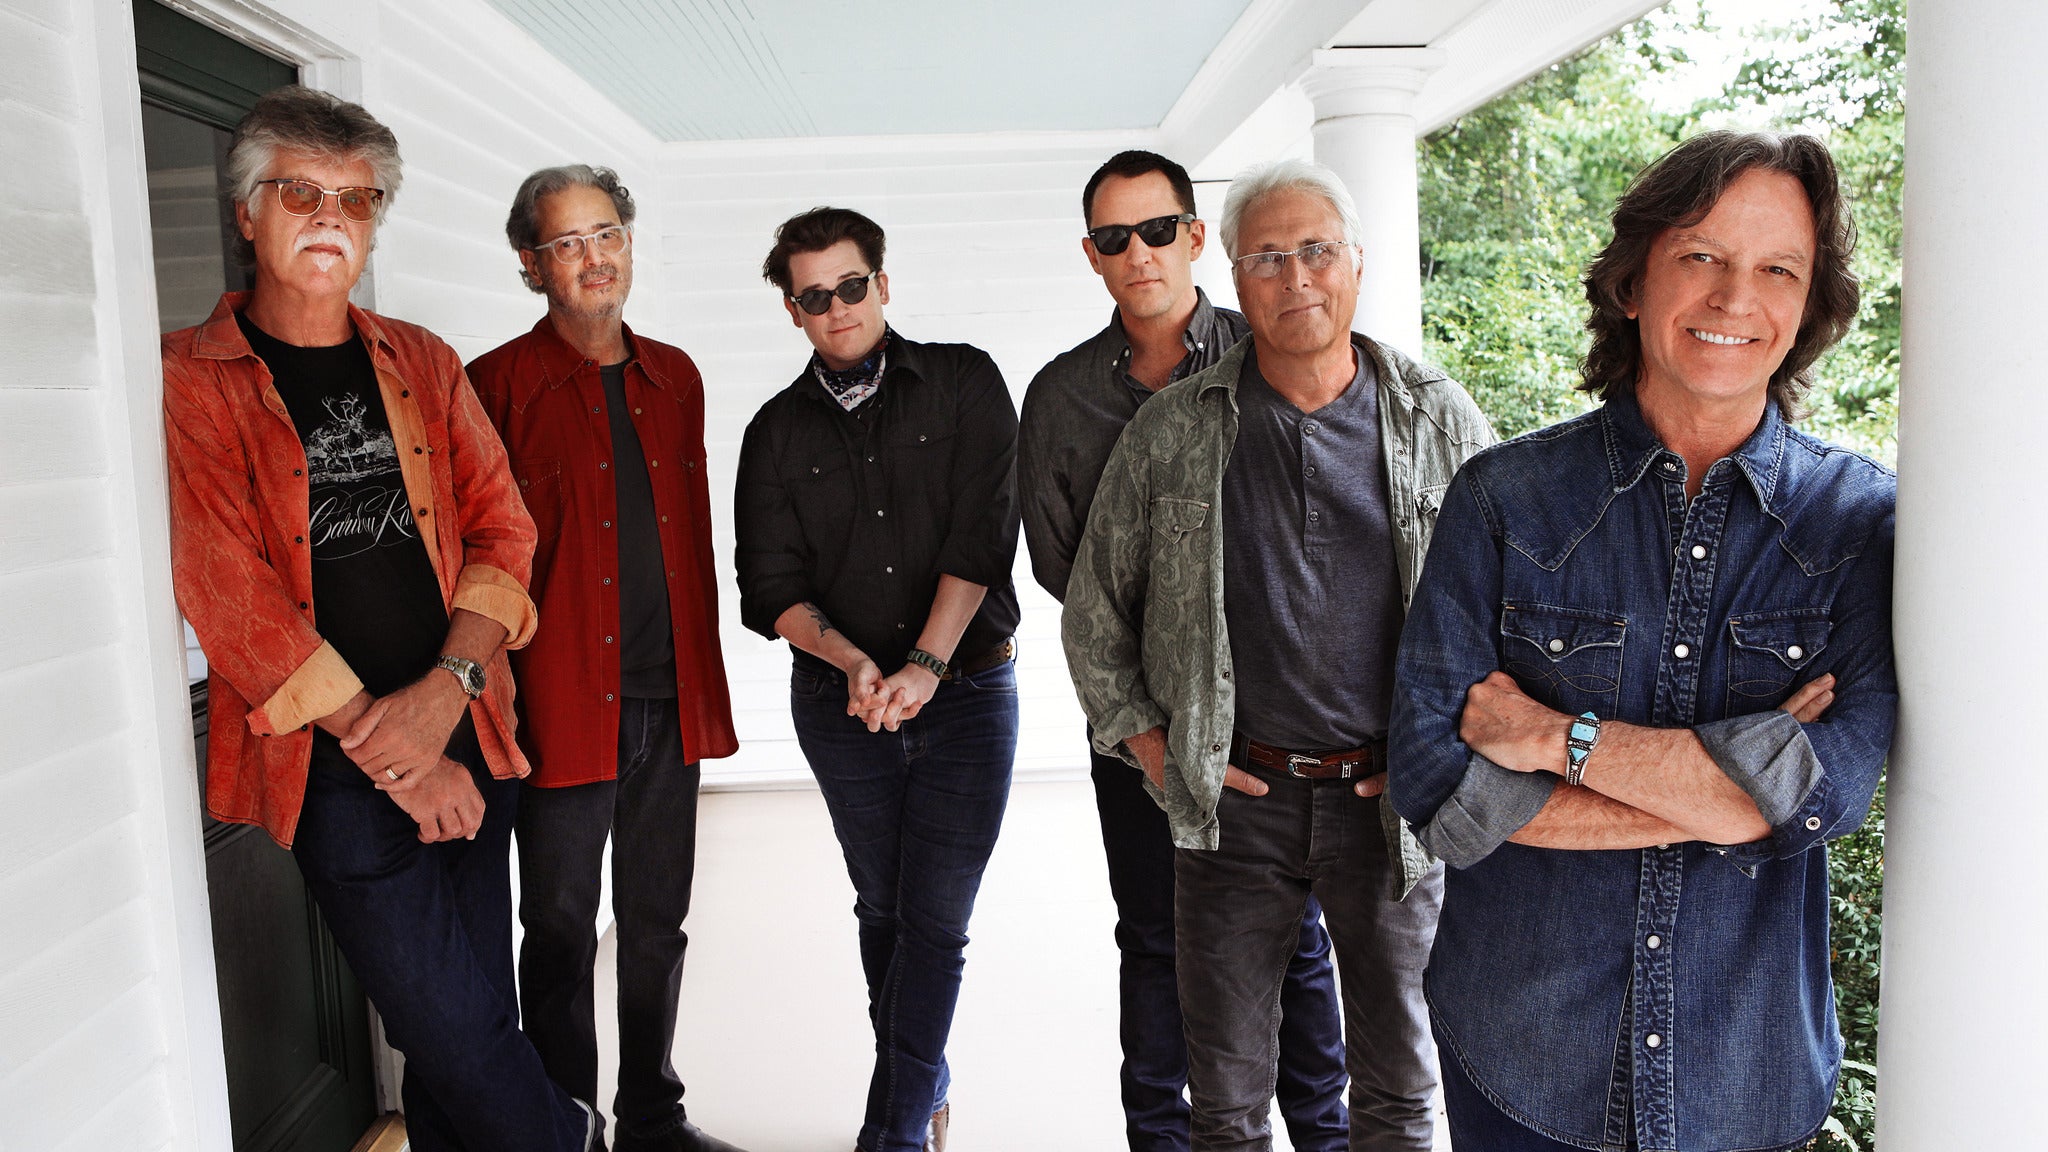 Nitty Gritty Dirt Band in Chattanooga event information